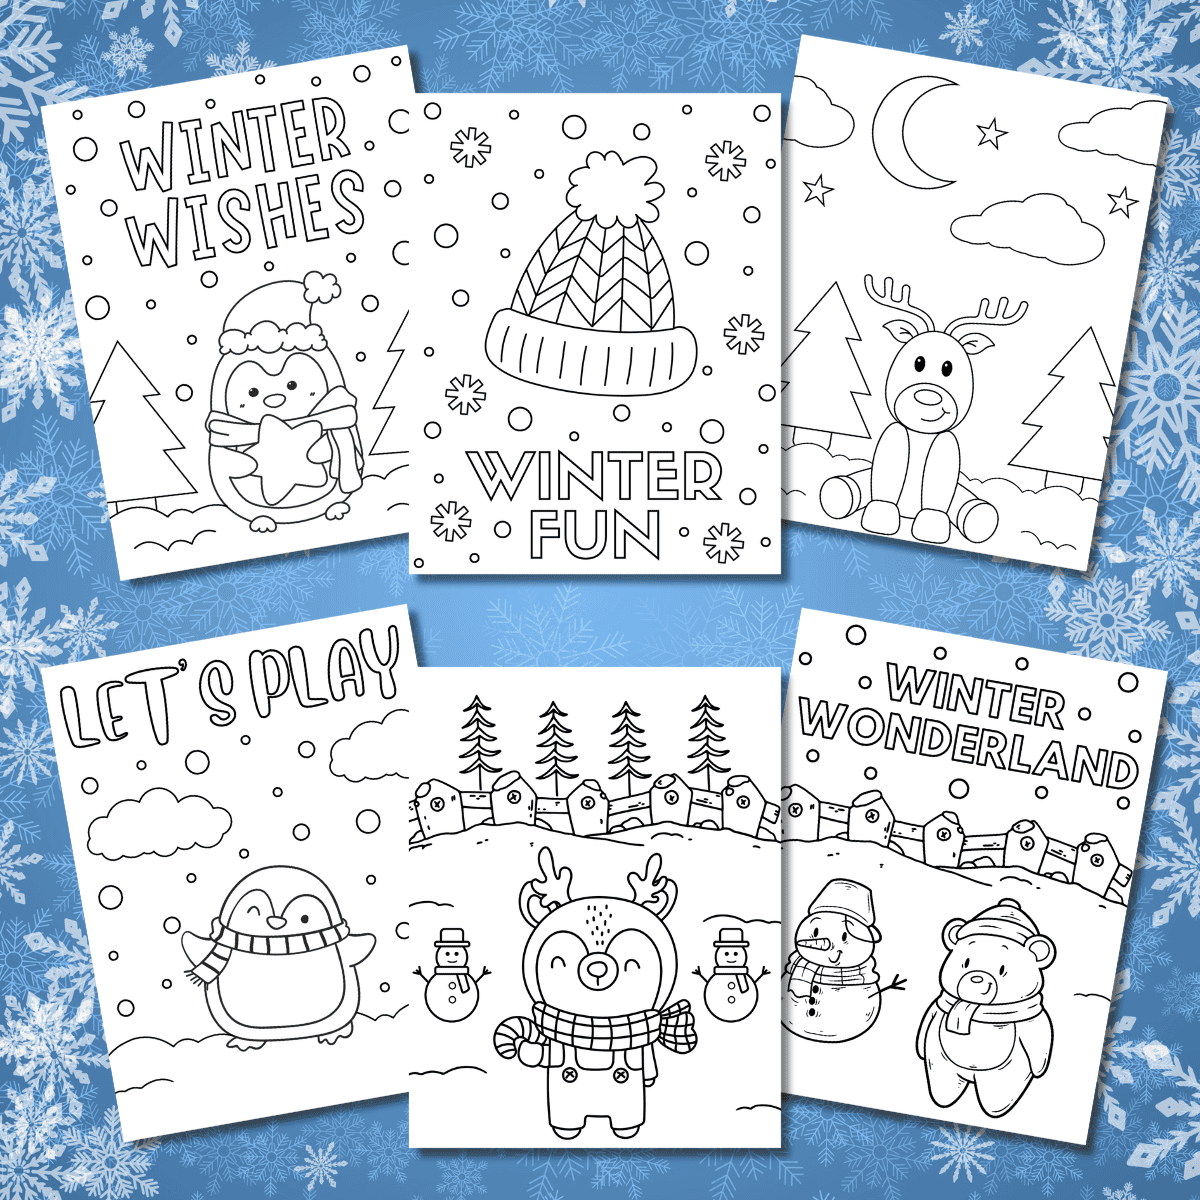 25 Free Winter Coloring Pages for Kids - Prudent Penny Pincher